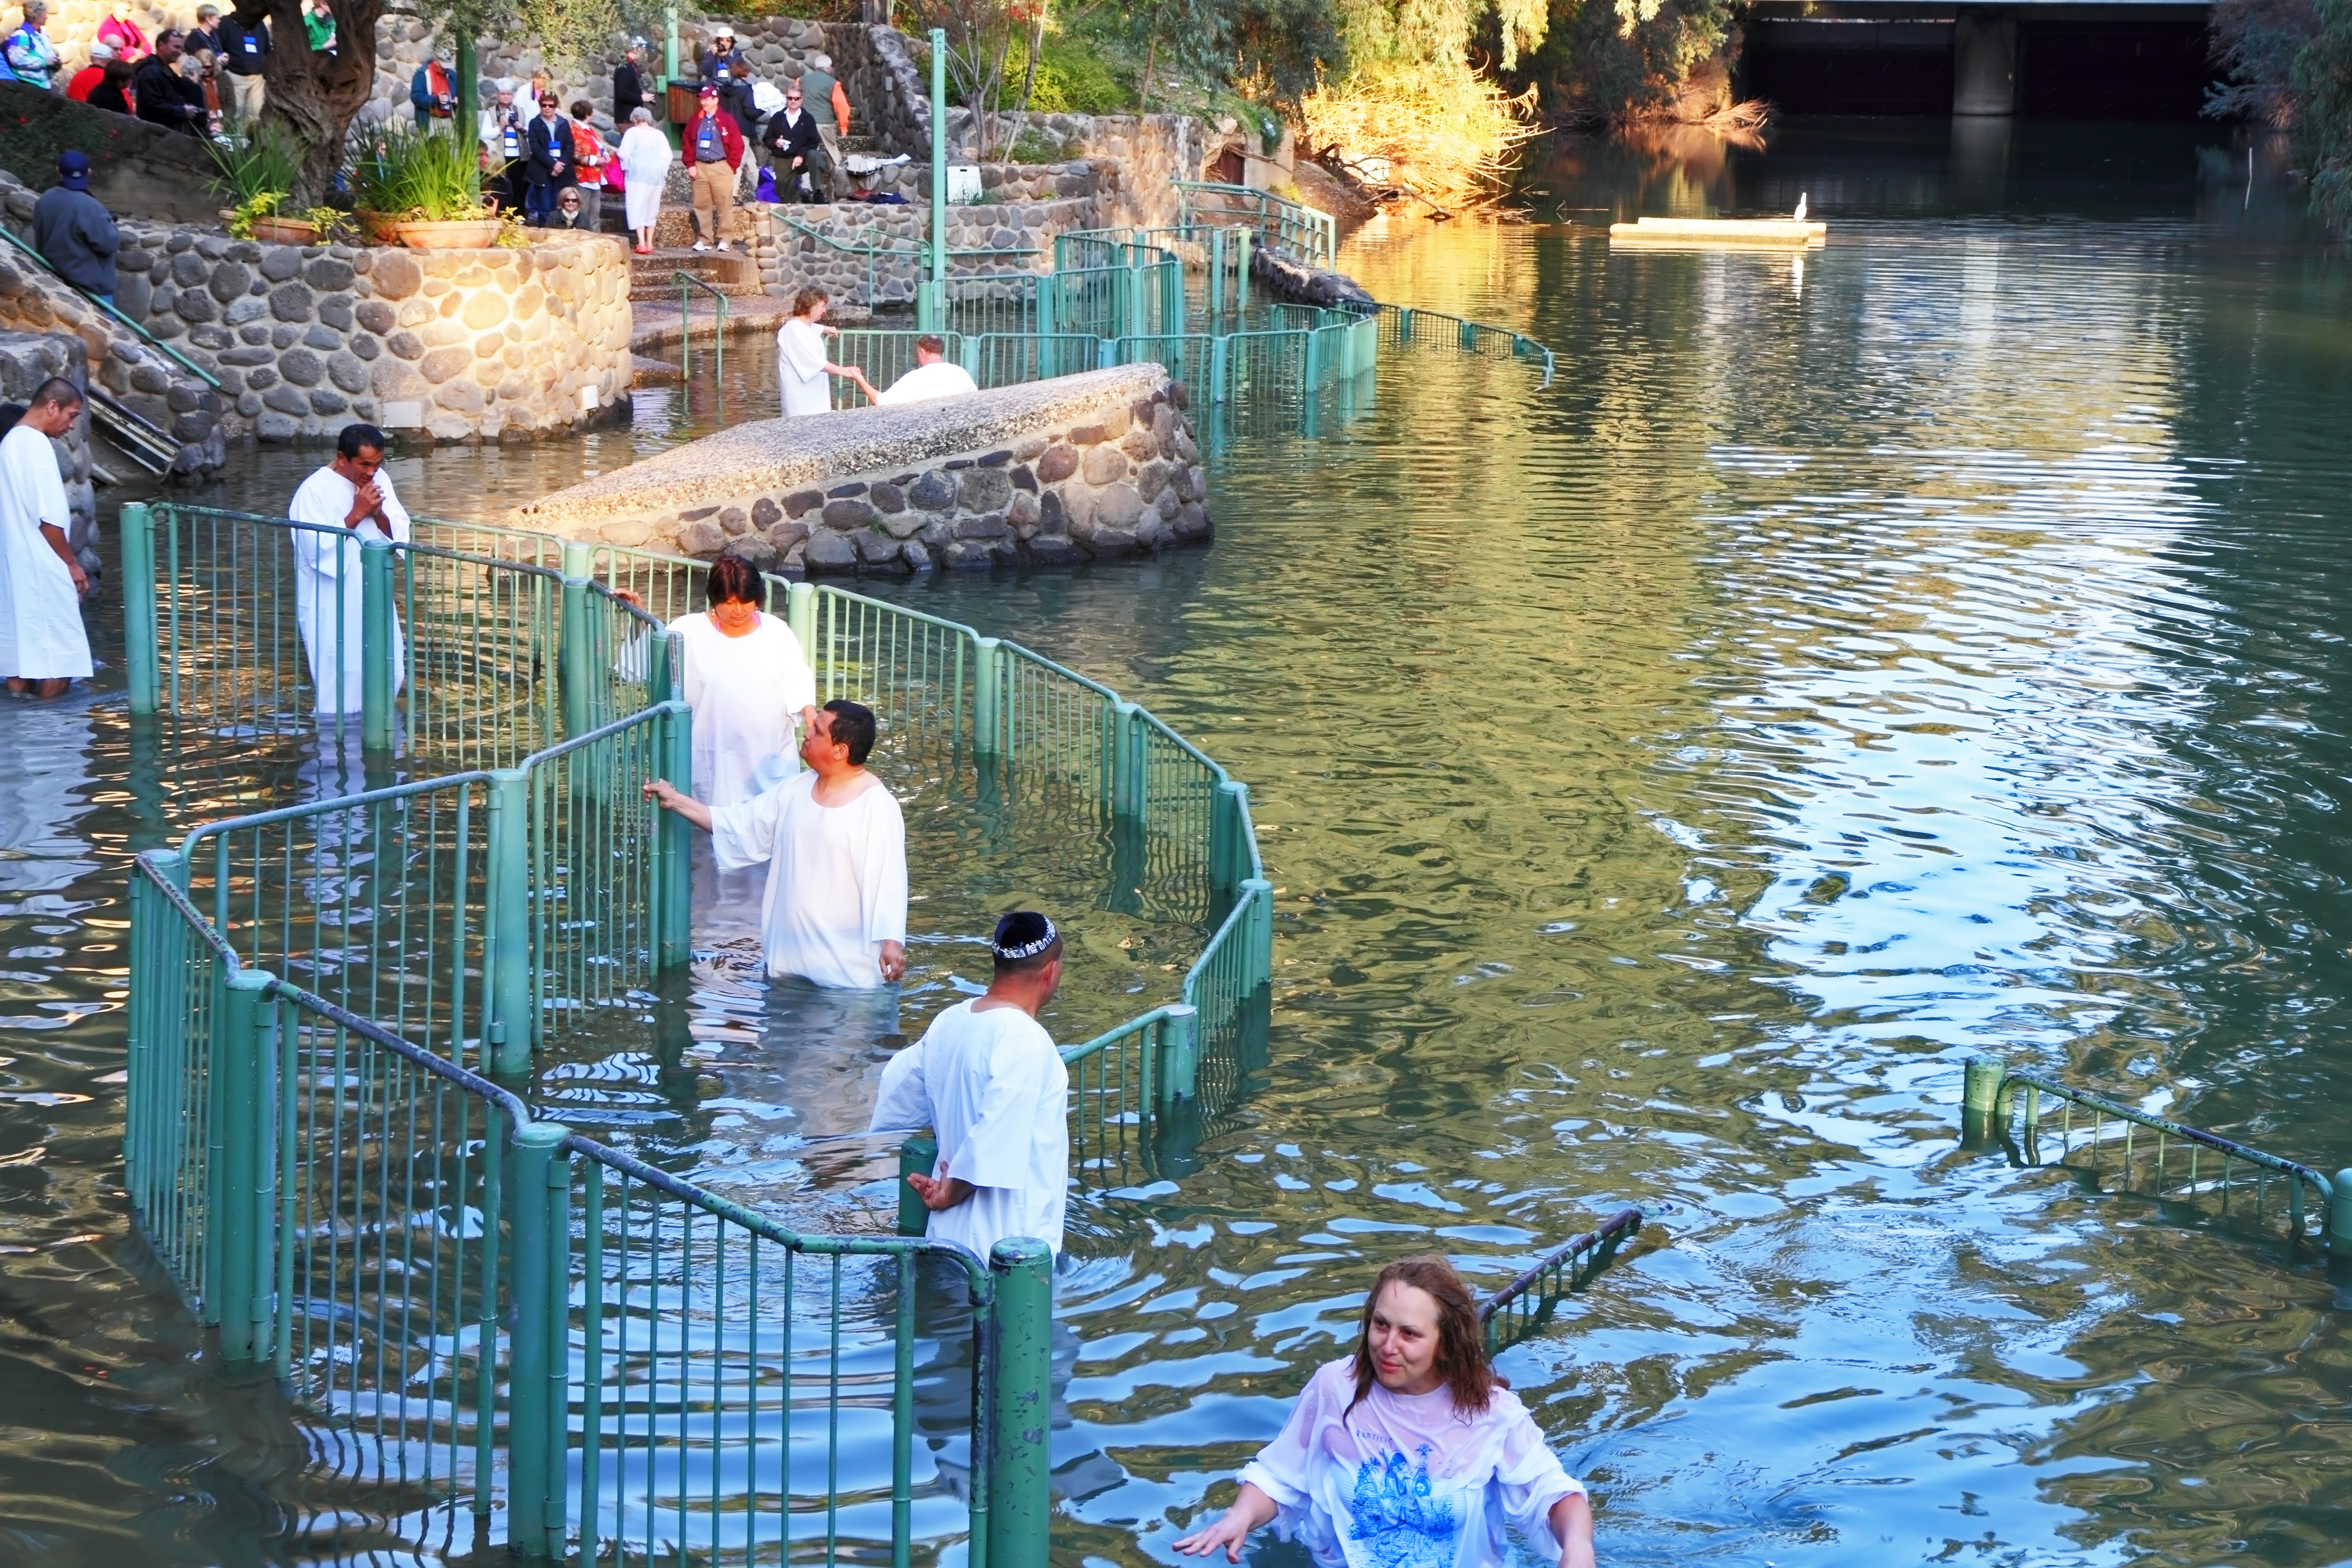 Yardenit, Israel - January 21: Christian pilgrims ritual baptism in the waters of the Jordan River. Pilgrims enter the water, dressed in special white christening shirt